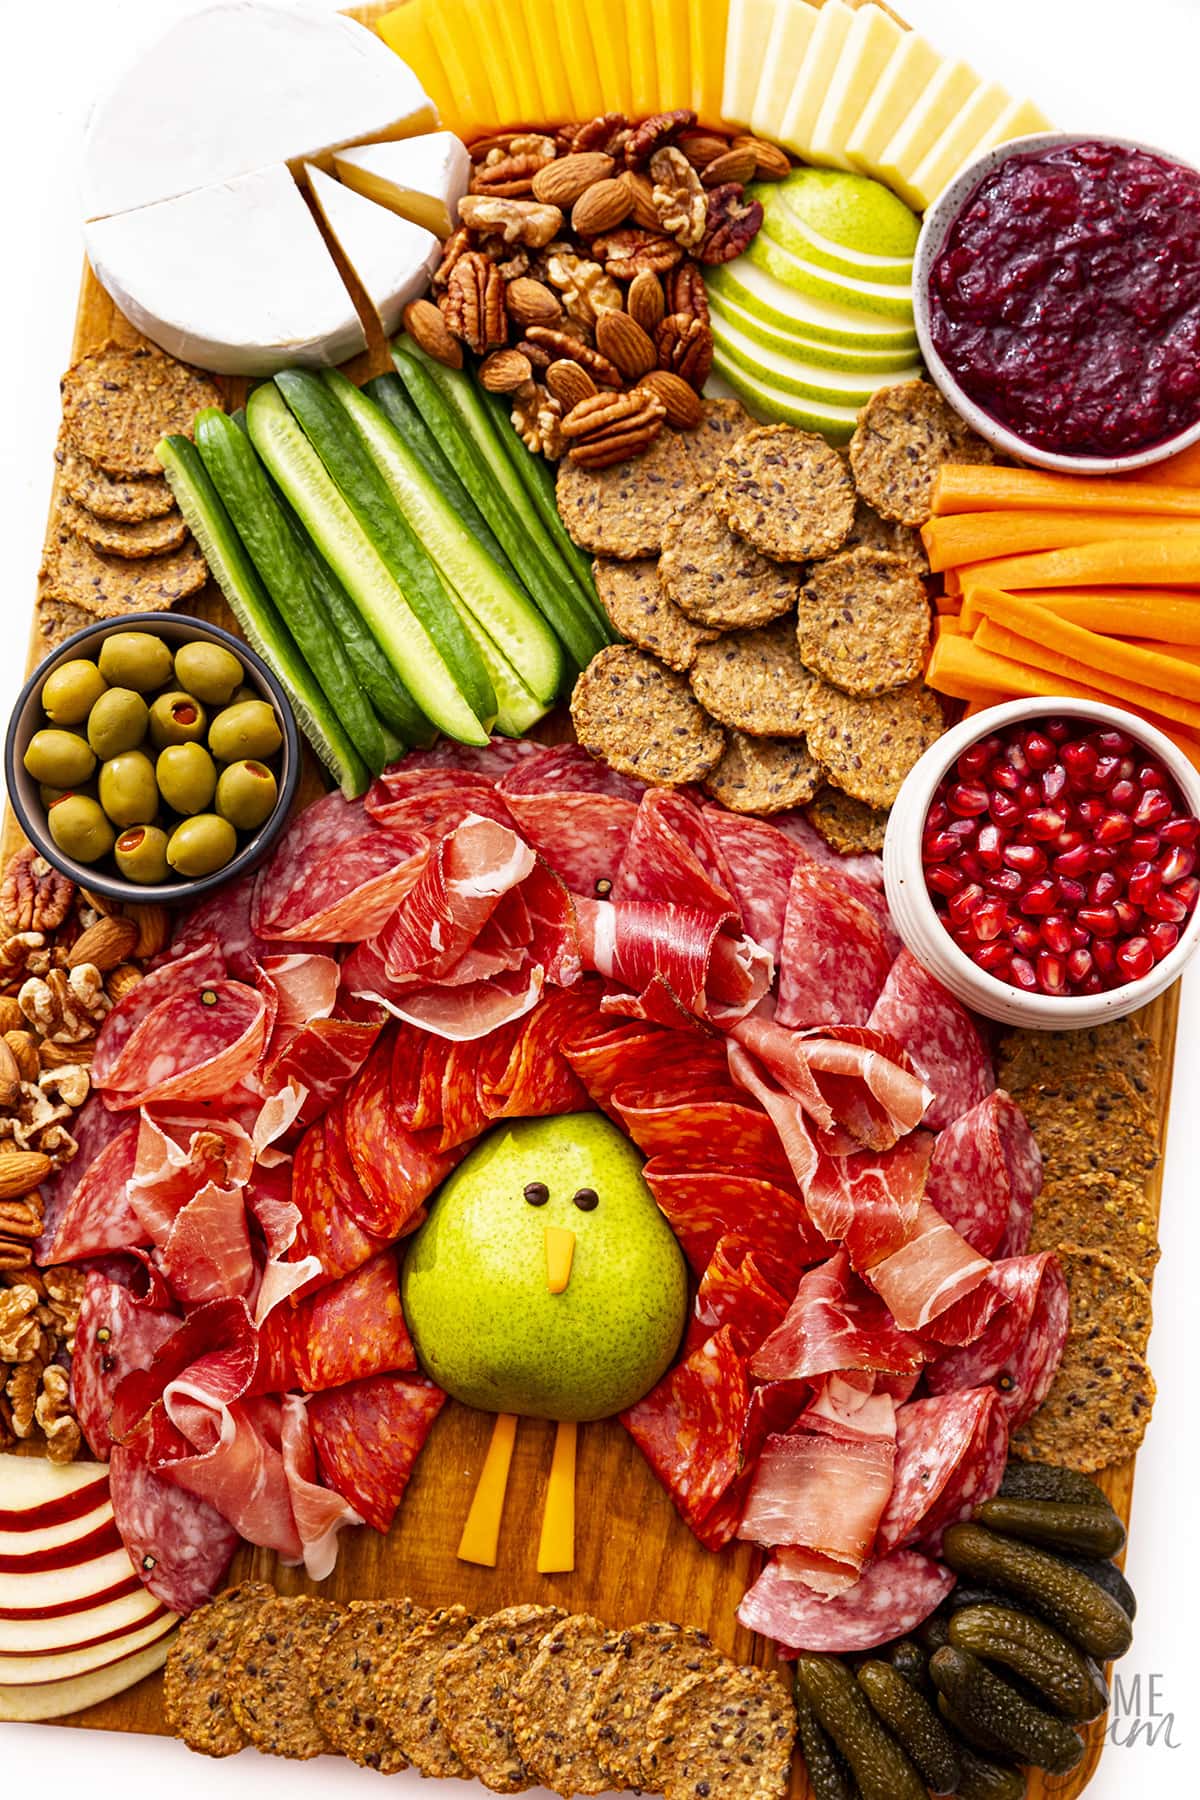 A meat and cheese board with a turkey made from half a pear surrounded by folded meat for the tail feathers. The board is accented by crackers and fresh veggies.